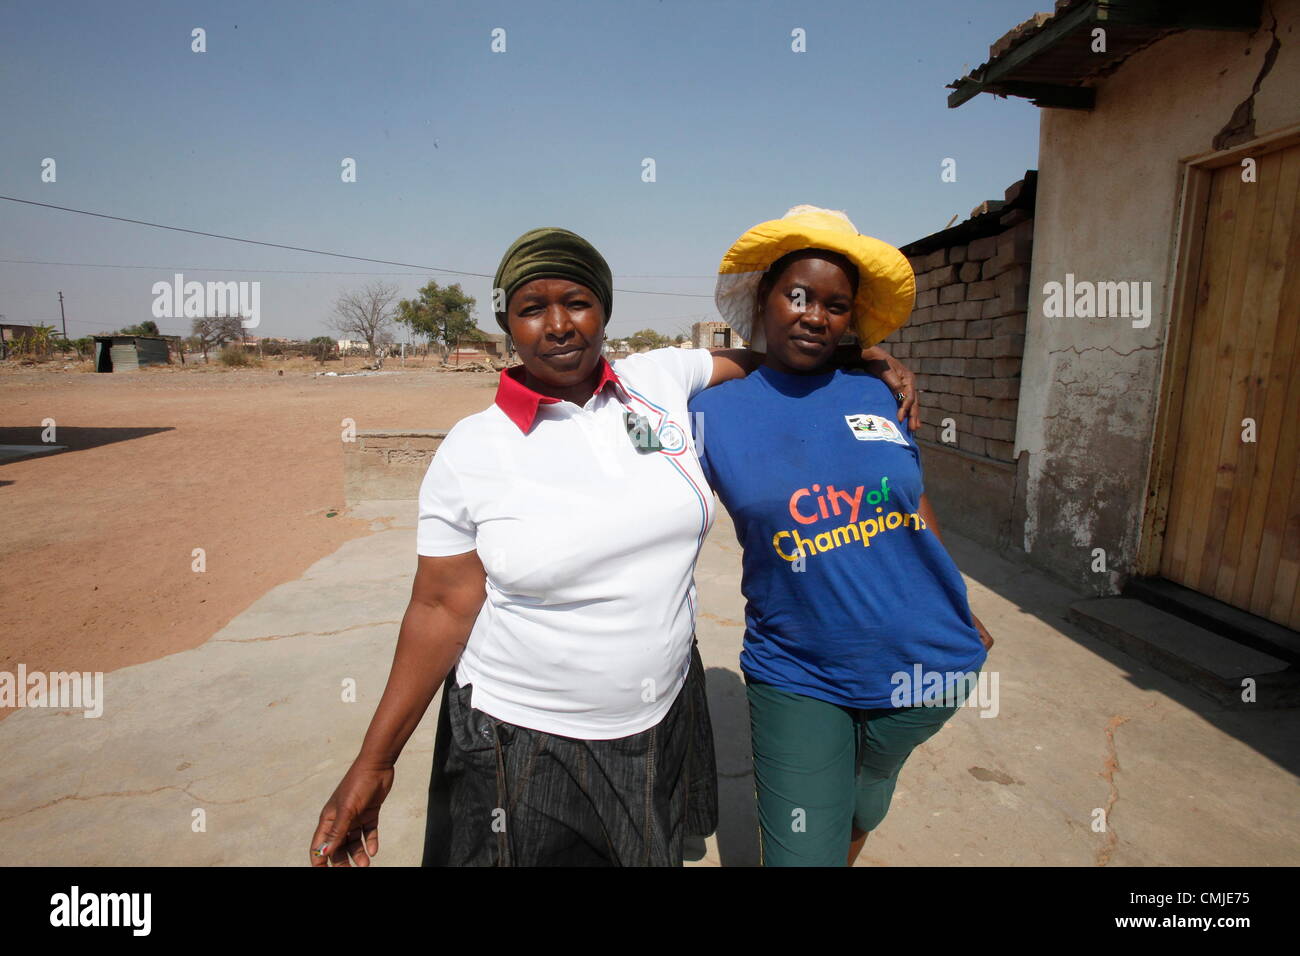 15th Aug 2012. LIMPOPO, SOUTH AFRICA: Dorcus Semenya mother of athlete Caster Semenya with her daughter Mamoraba outside her home on August 15, 2012 in Limpopo, South Africa. Dorcus discussed her trip to the London Olympics to see her daughter compete and admitted that watching Caster in the final was unnerving. (Photo by Gallo Images / The Times / Sydney Seshibedi) Stock Photo